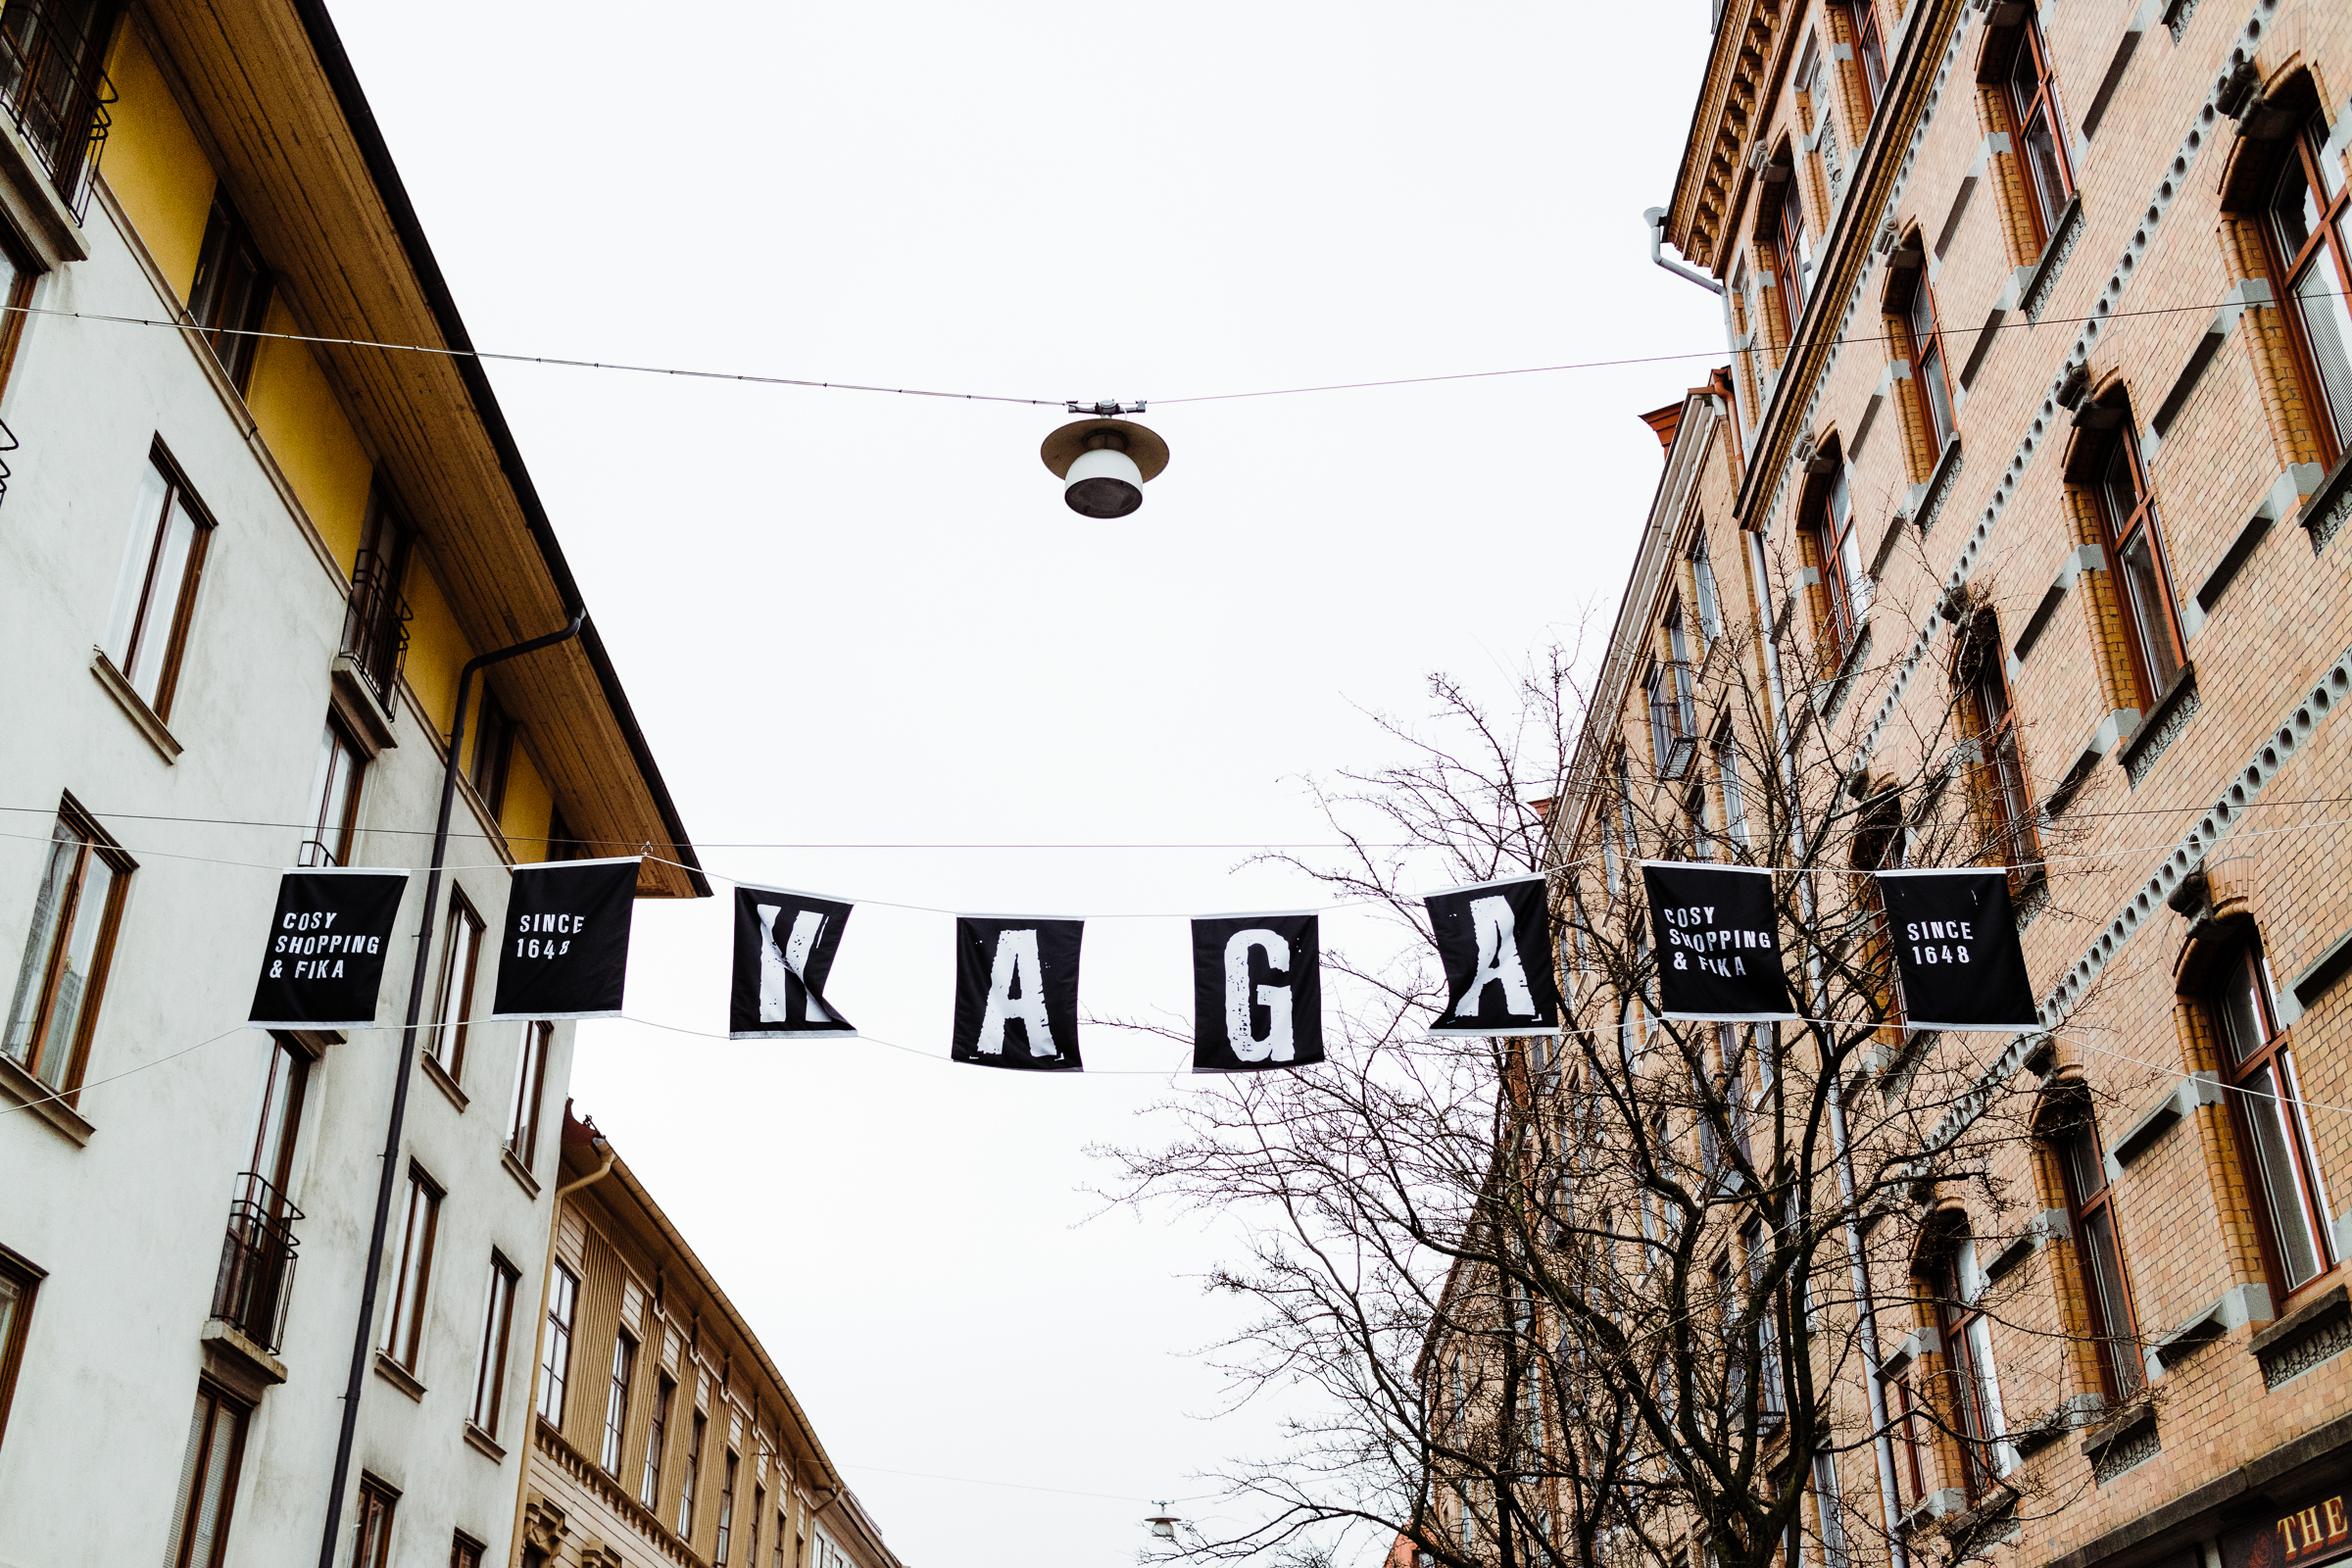  Haga is the oldest shopping district in Gothenburg dating back to 1648! 